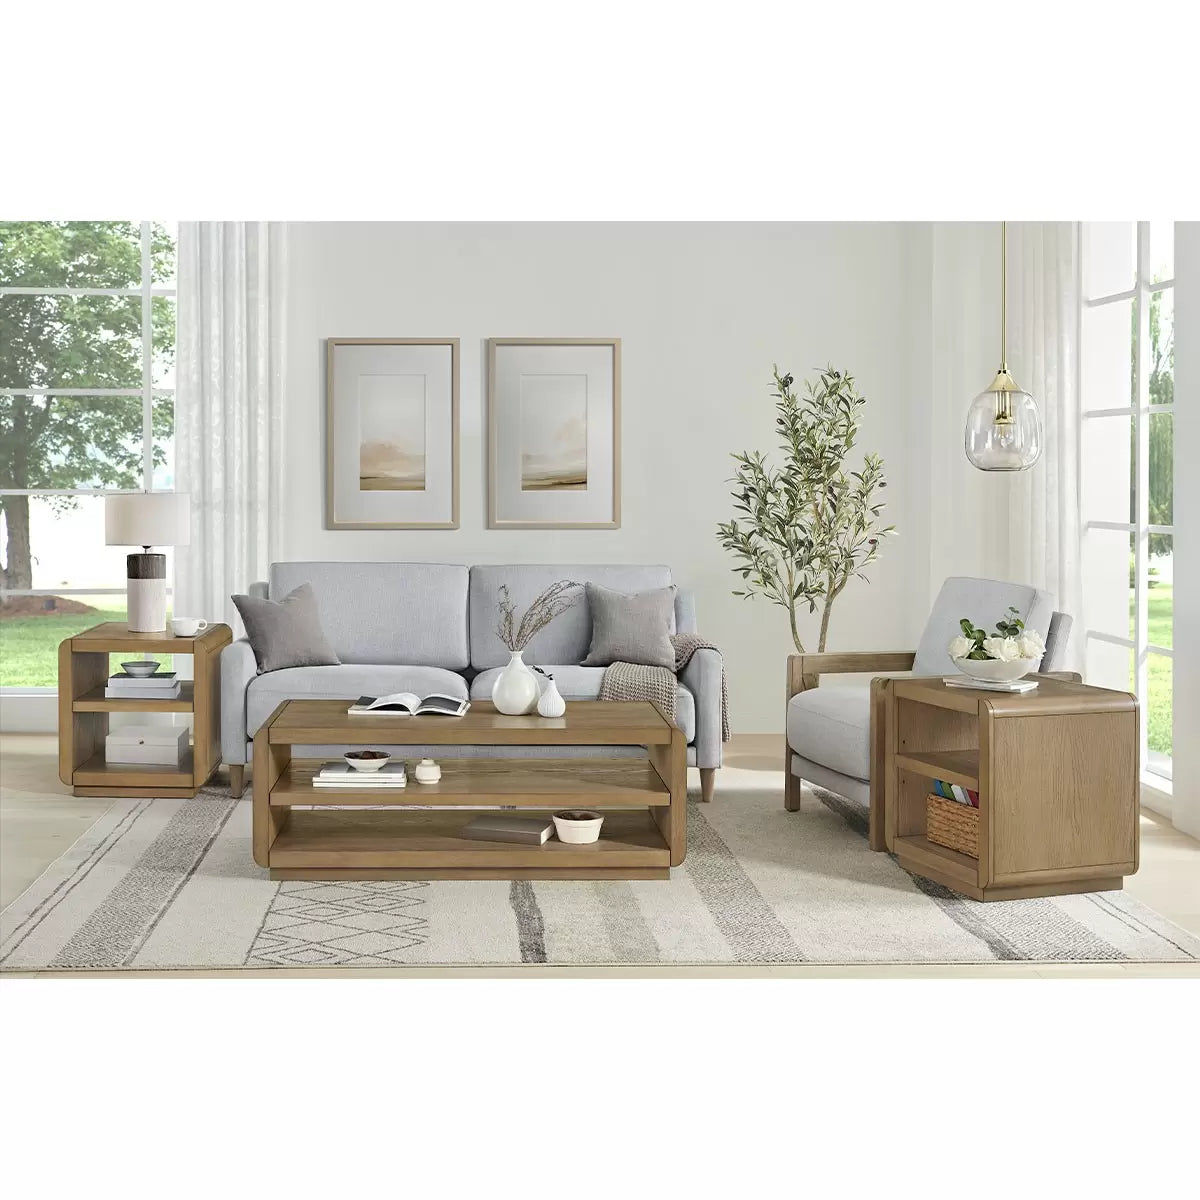 Like NEW - Costco - Foremost Coffee Table + Side Table 3-Piece Set - Retail $429